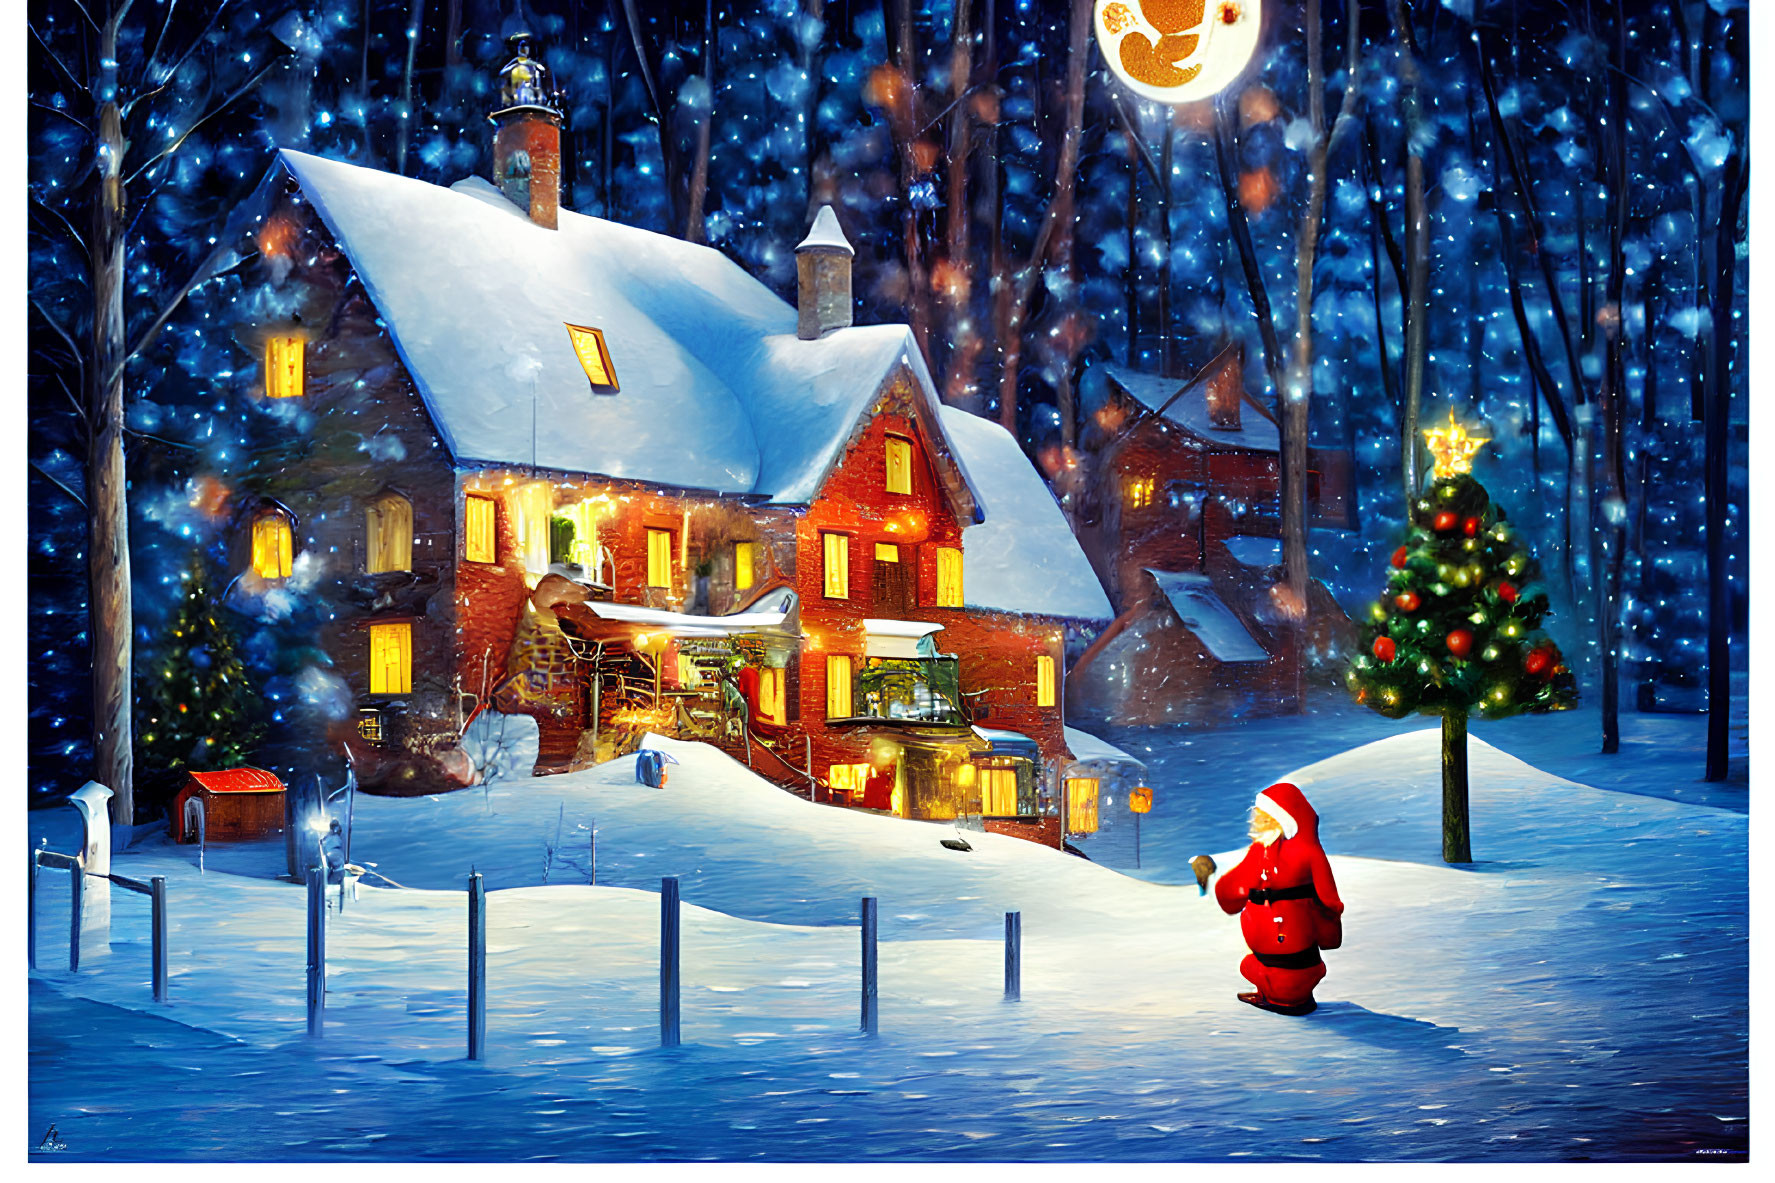 Snow-covered cottage with Santa Claus and Christmas tree on moonlit night